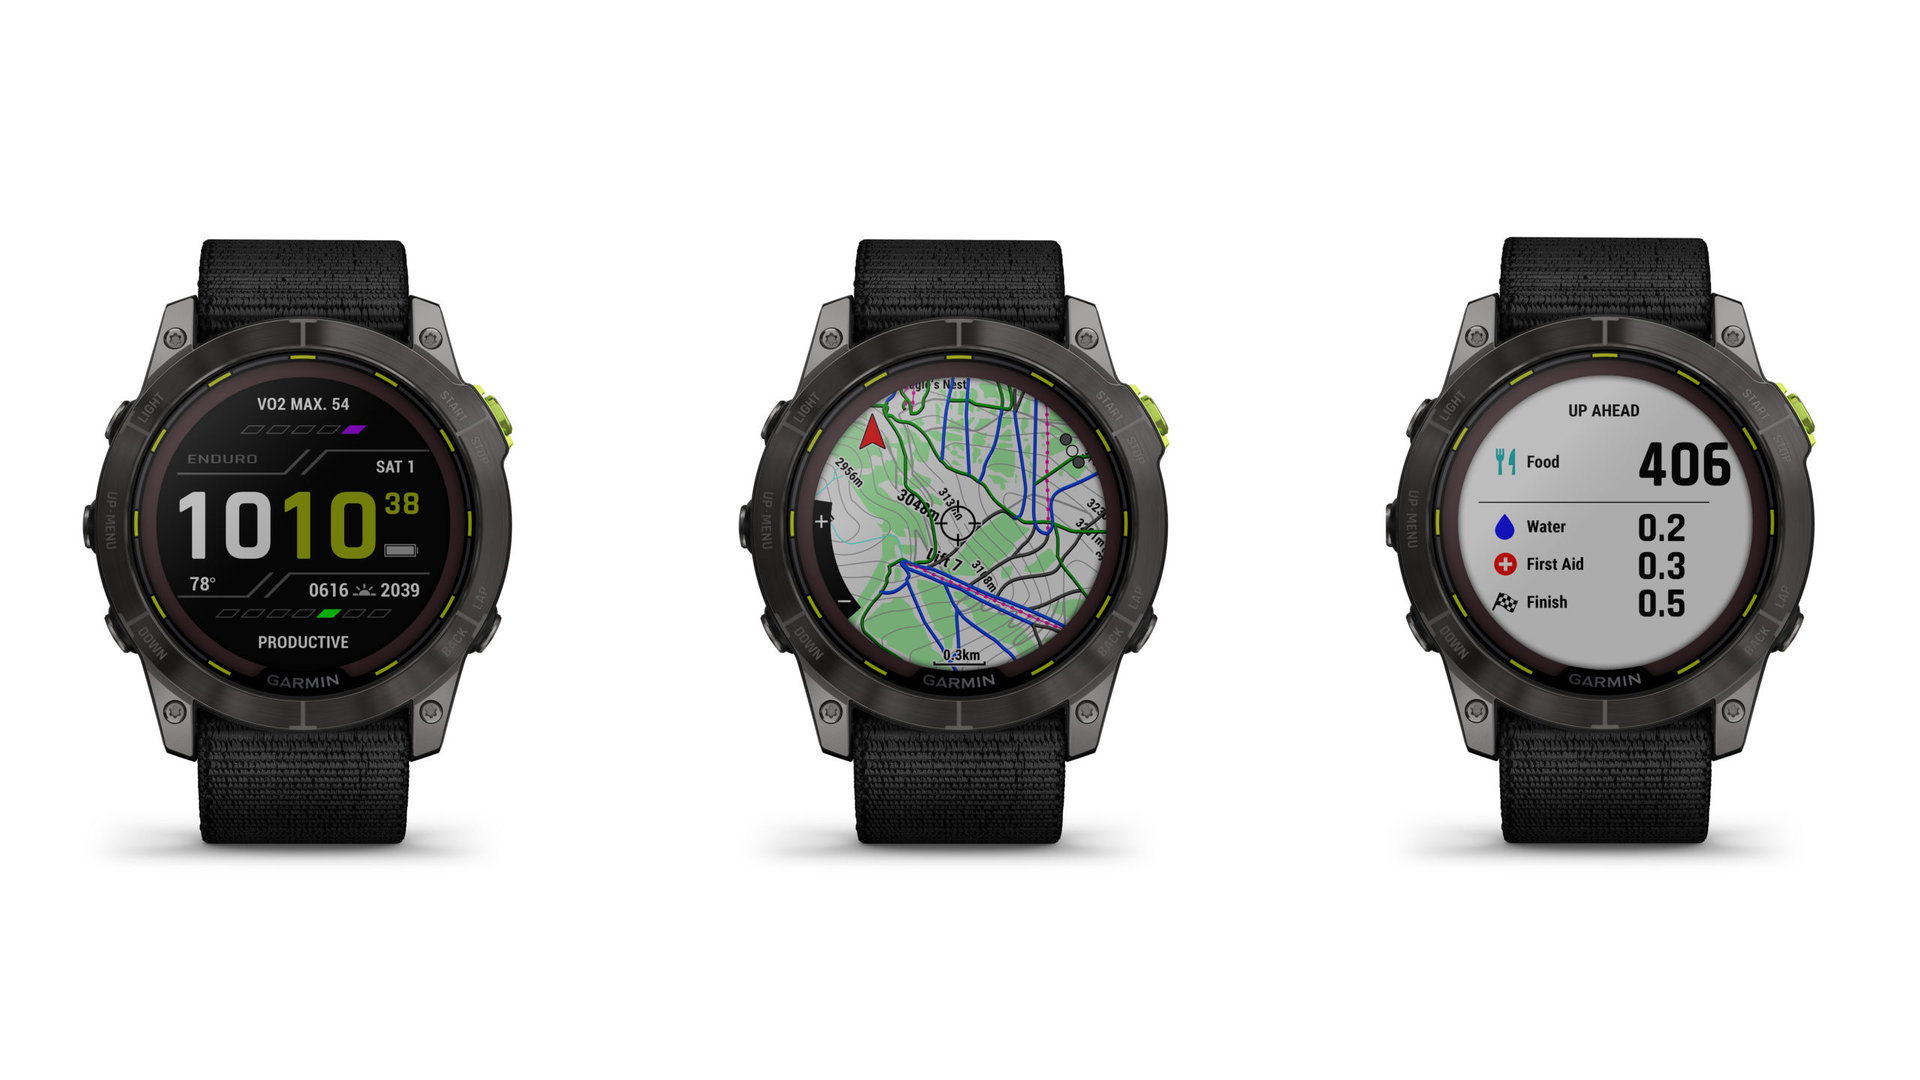 The Garmin Enduro 2 watch series features a variety of device screens, including race day and training tools.